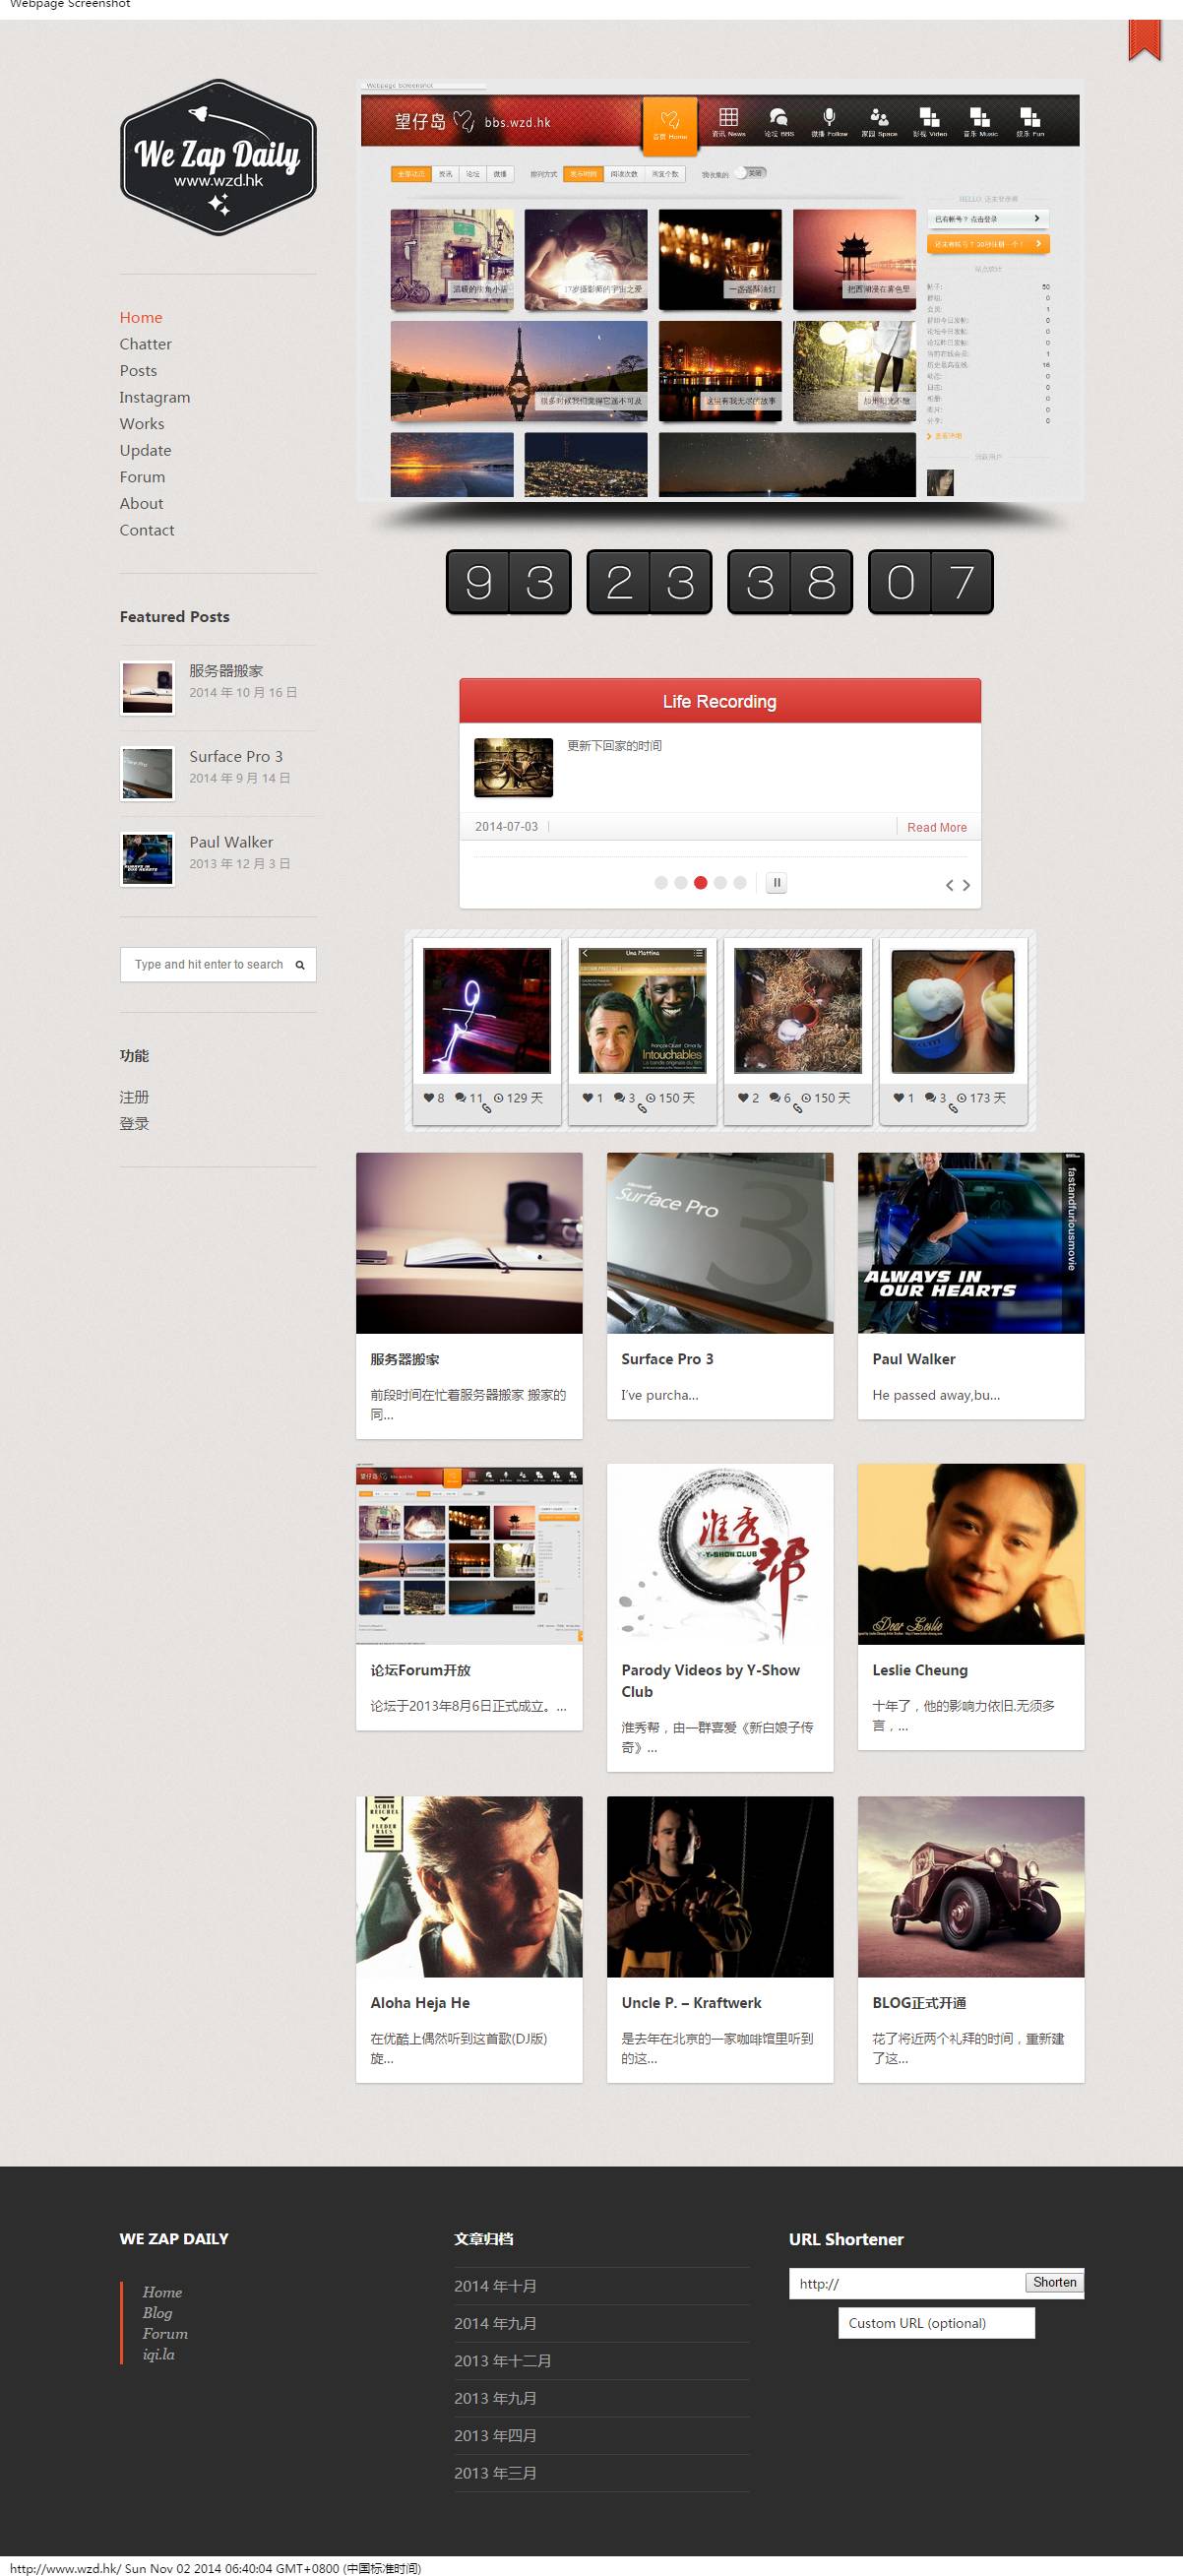 The Screenshot of Home page